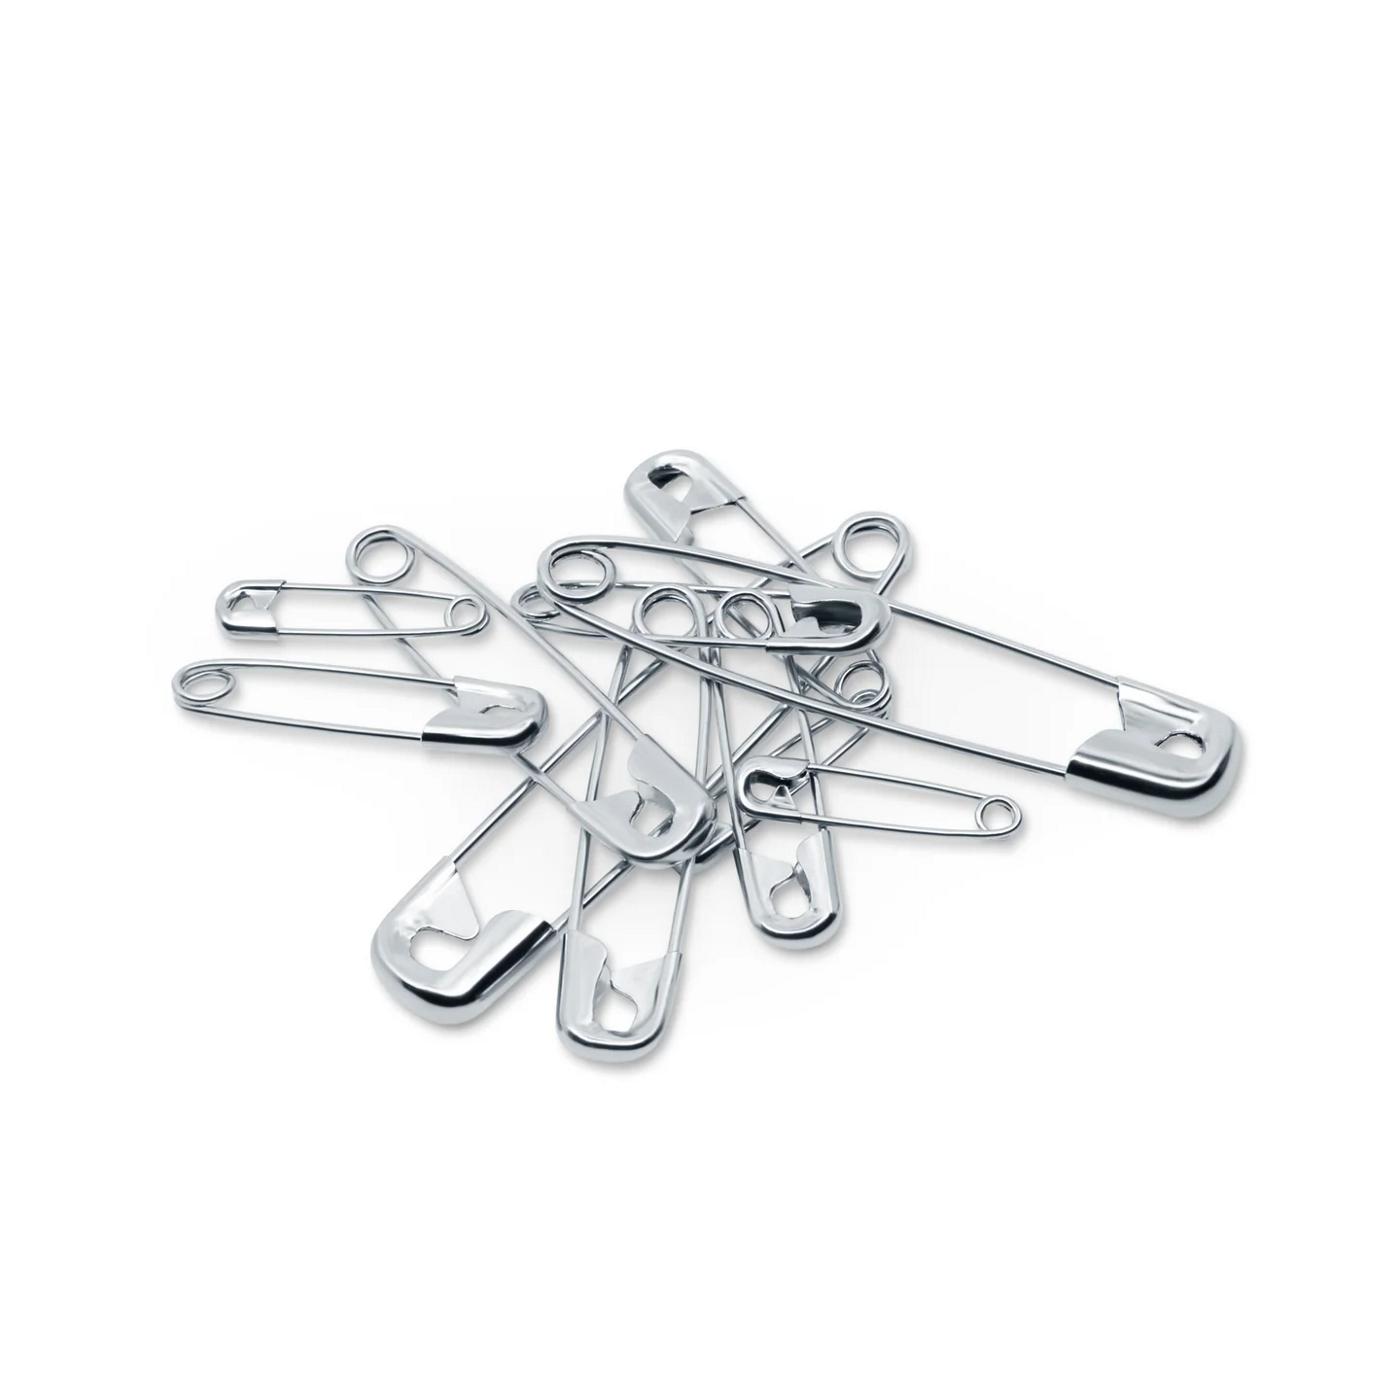 Dritz Assorted Safety Pins; image 3 of 4